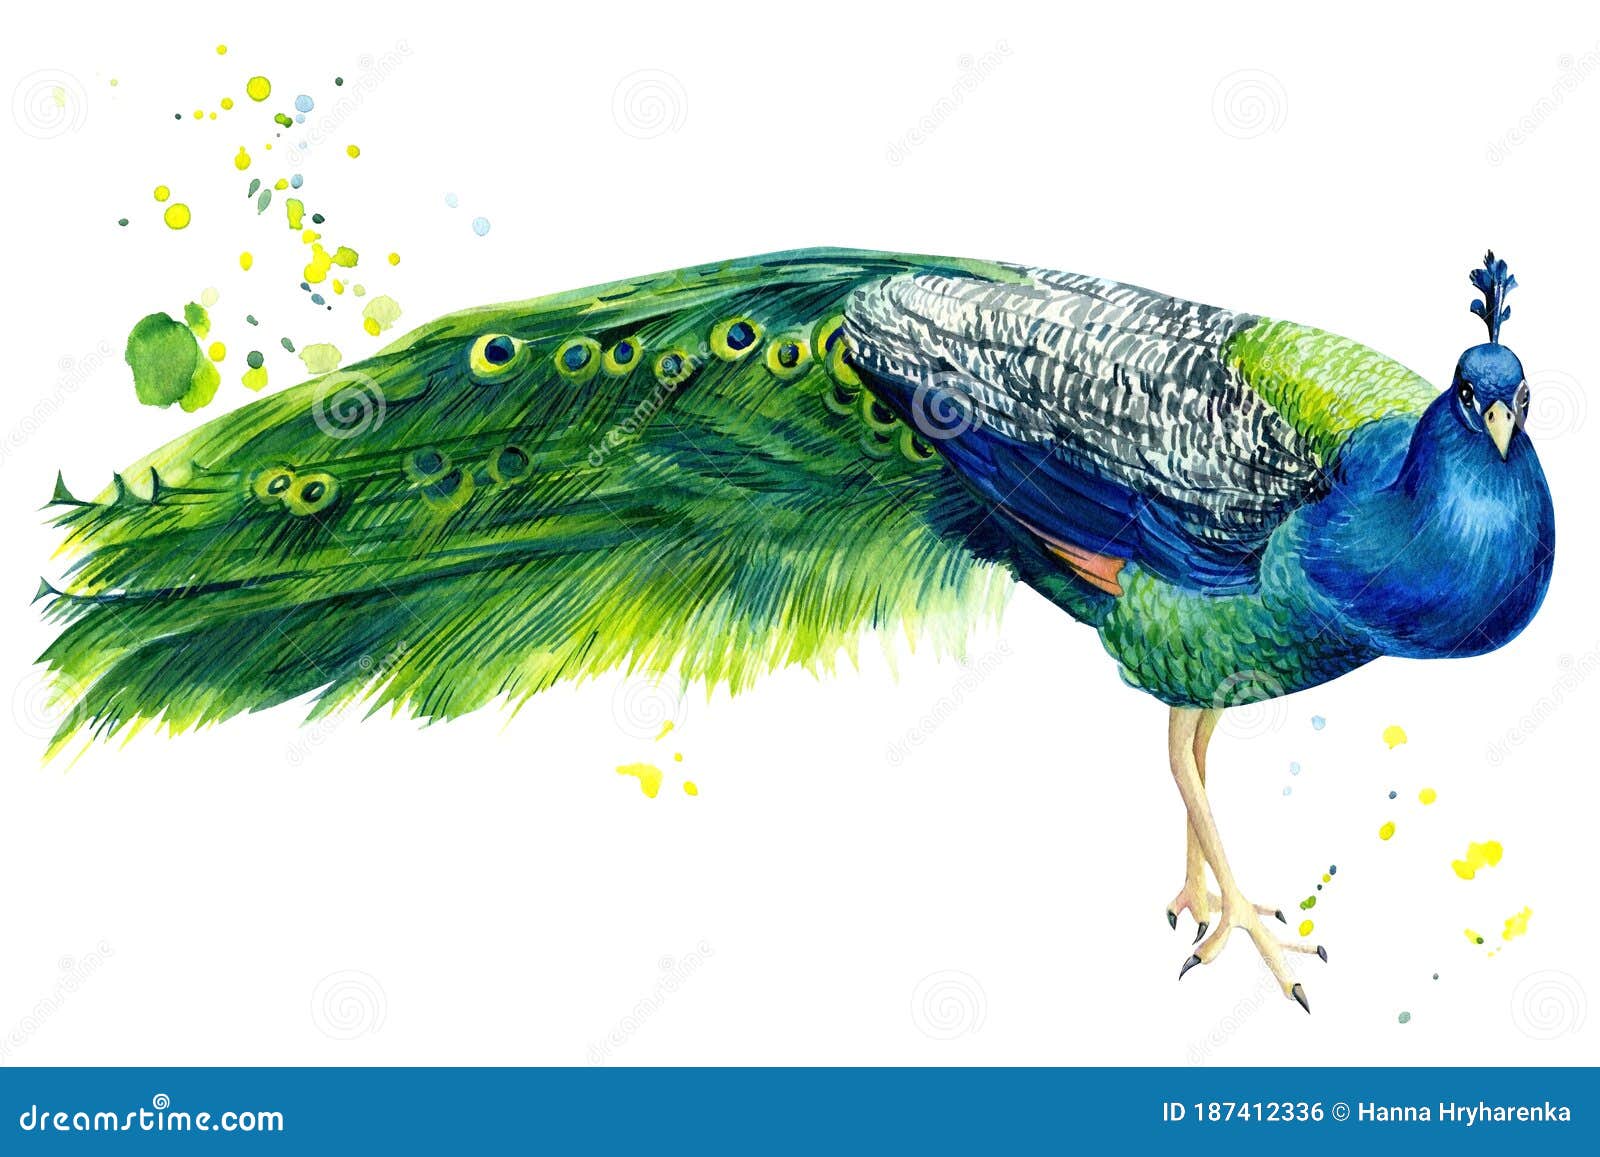 Peacock Colour Drawing Book Bird For Beginner: Buy Peacock Colour Drawing  Book Bird For Beginner by Editorial Team at Low Price in India |  Flipkart.com